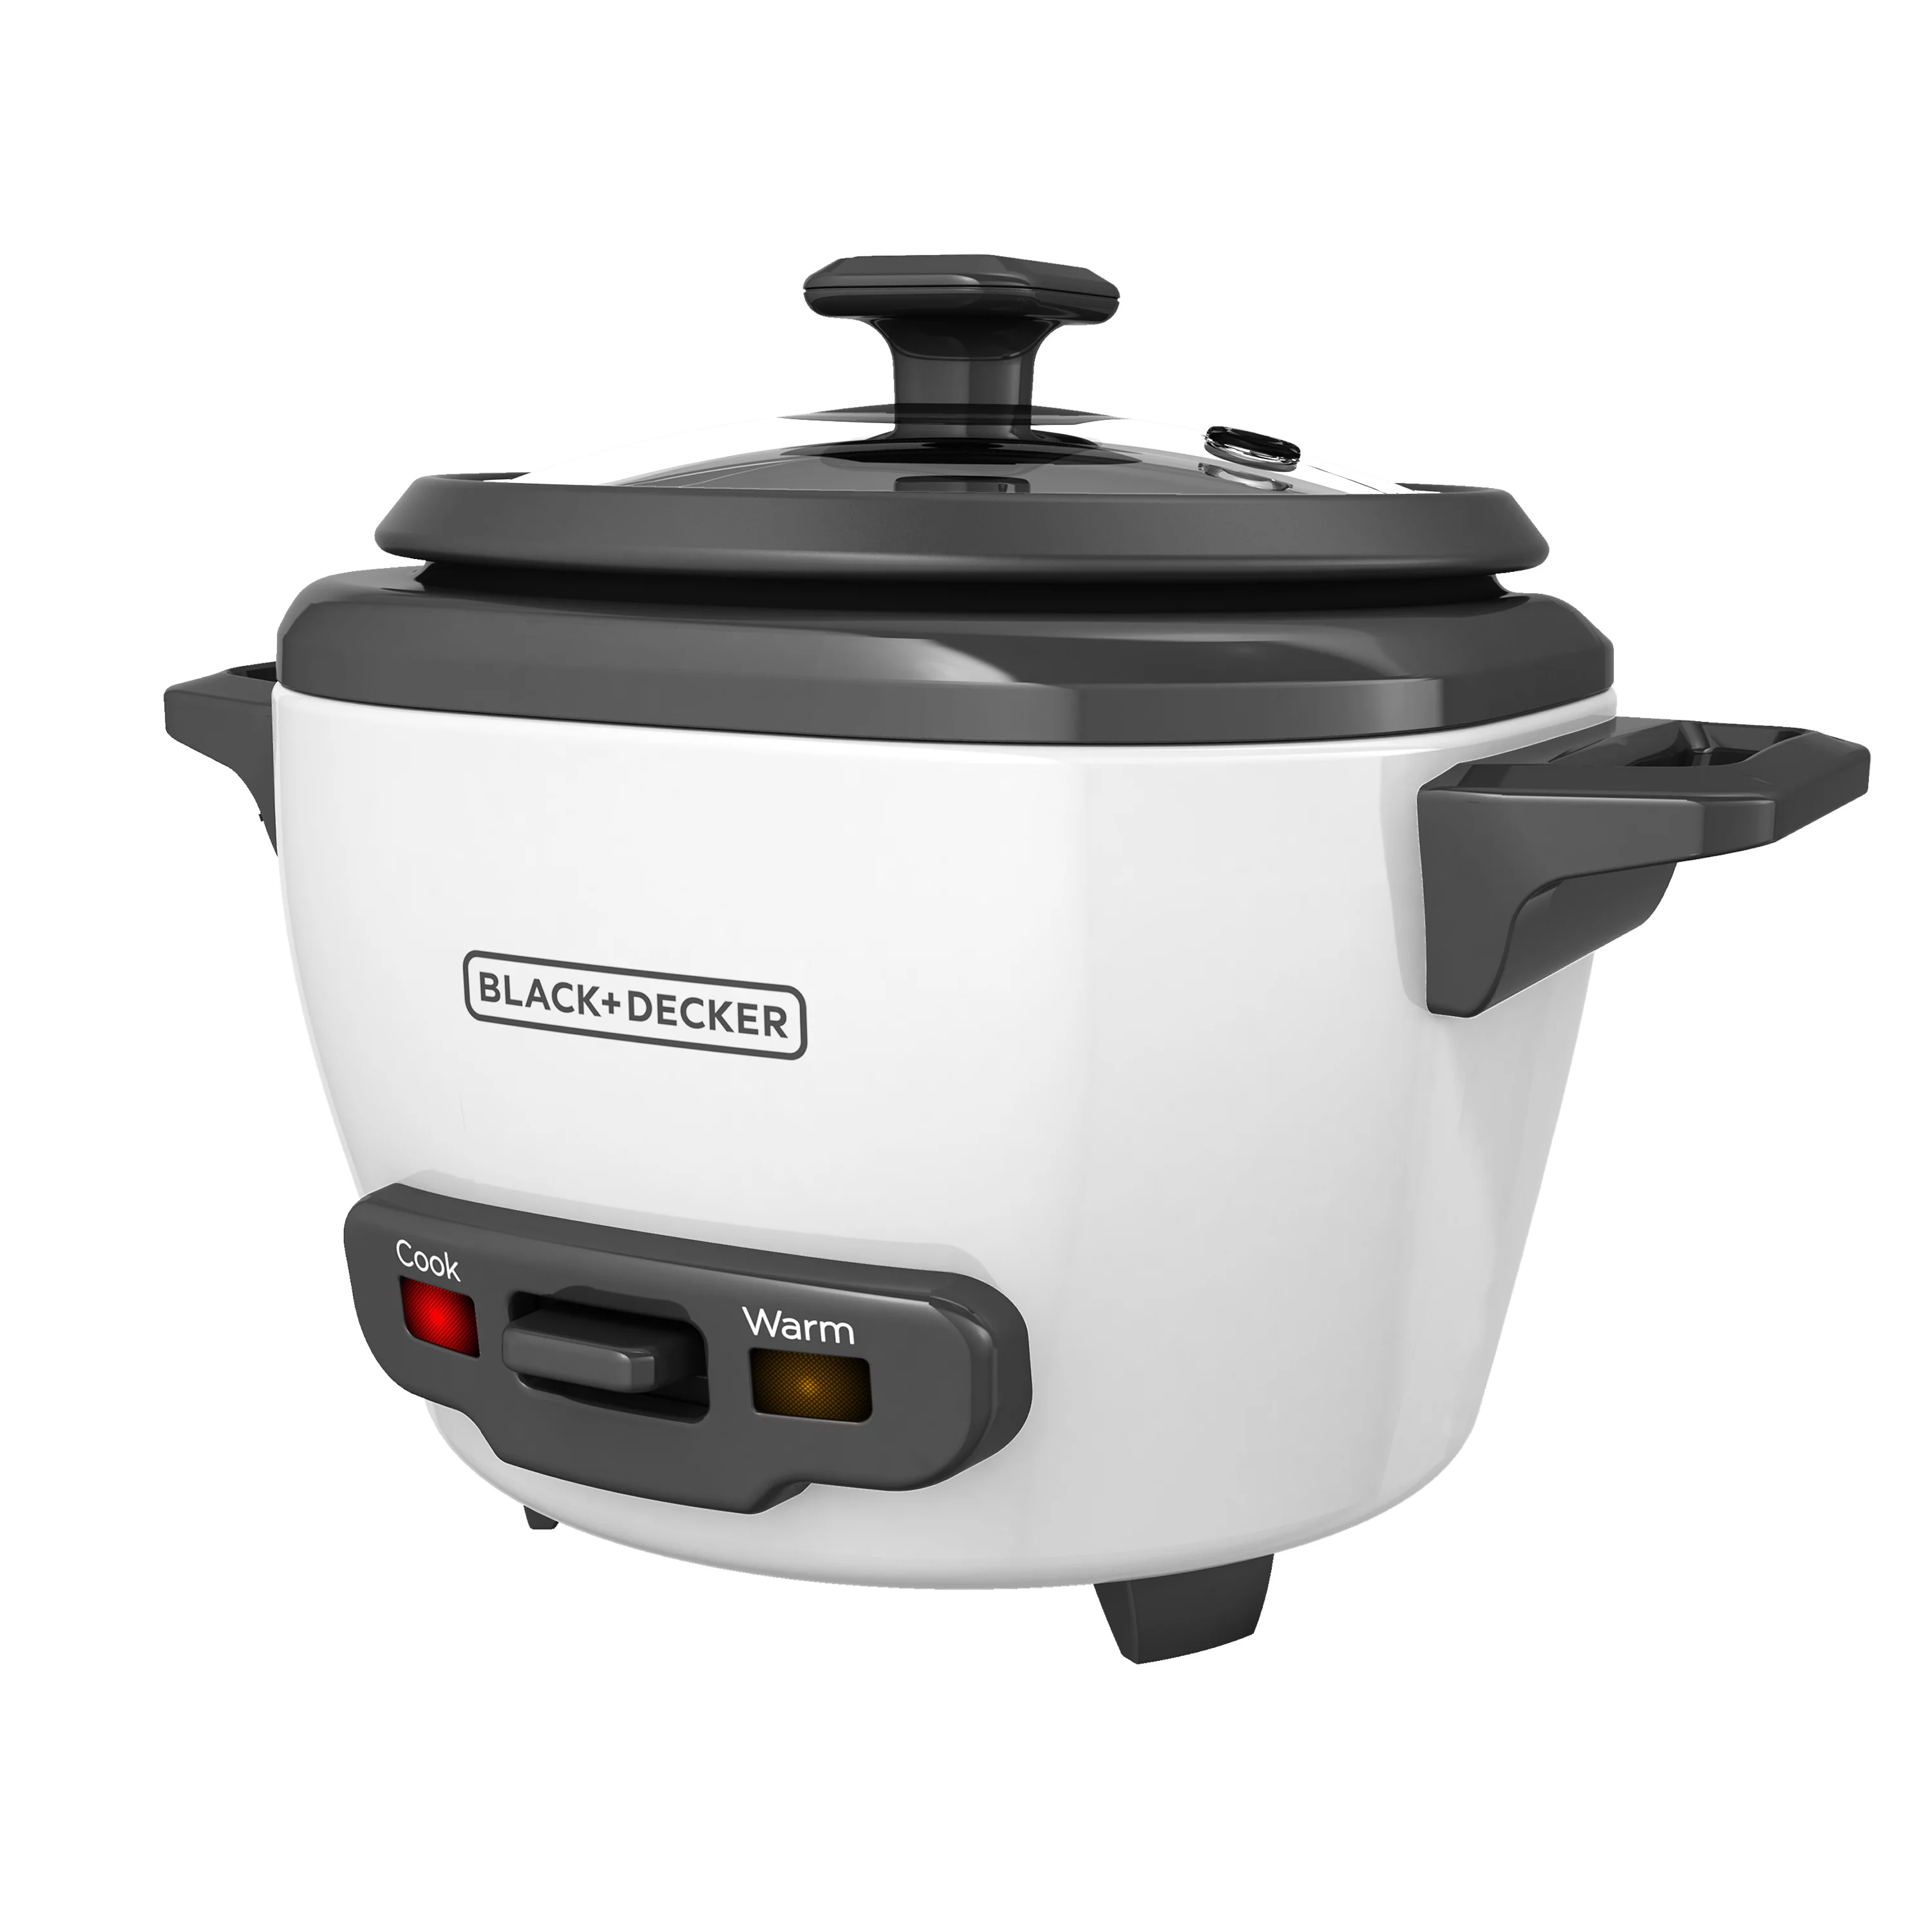 How To Use The Black And Decker Rice Cooker